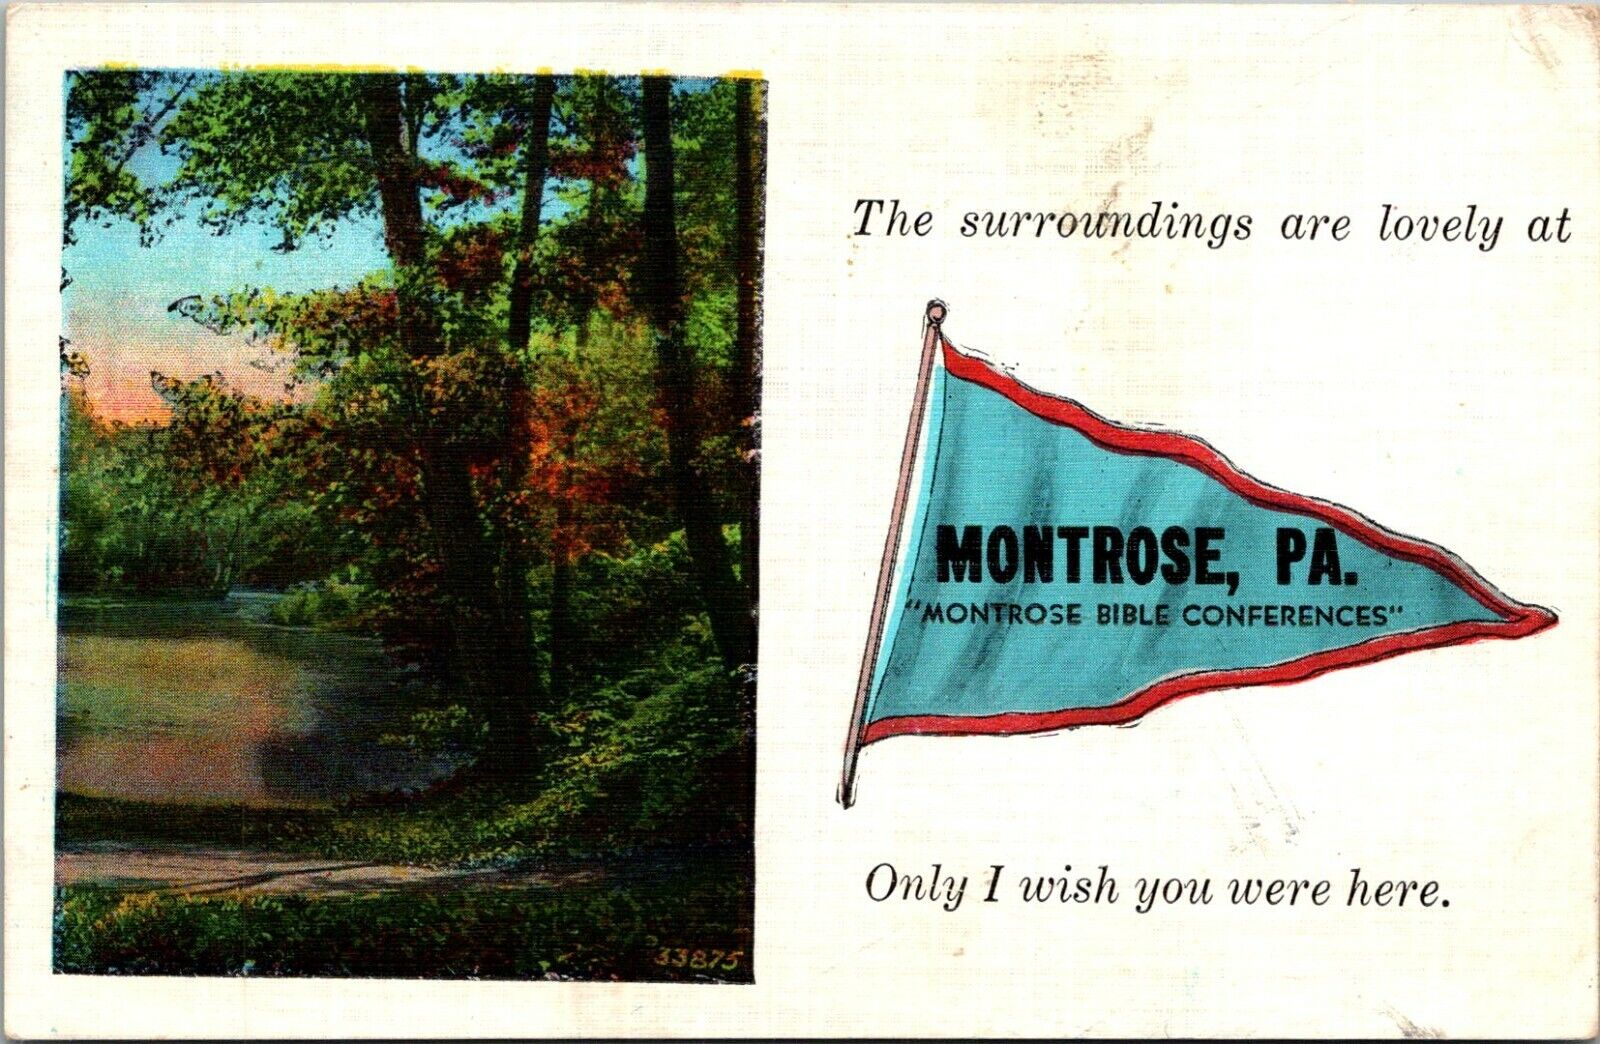 The surroundings are lovely at Montrose PA Only I wish you were here Postcard